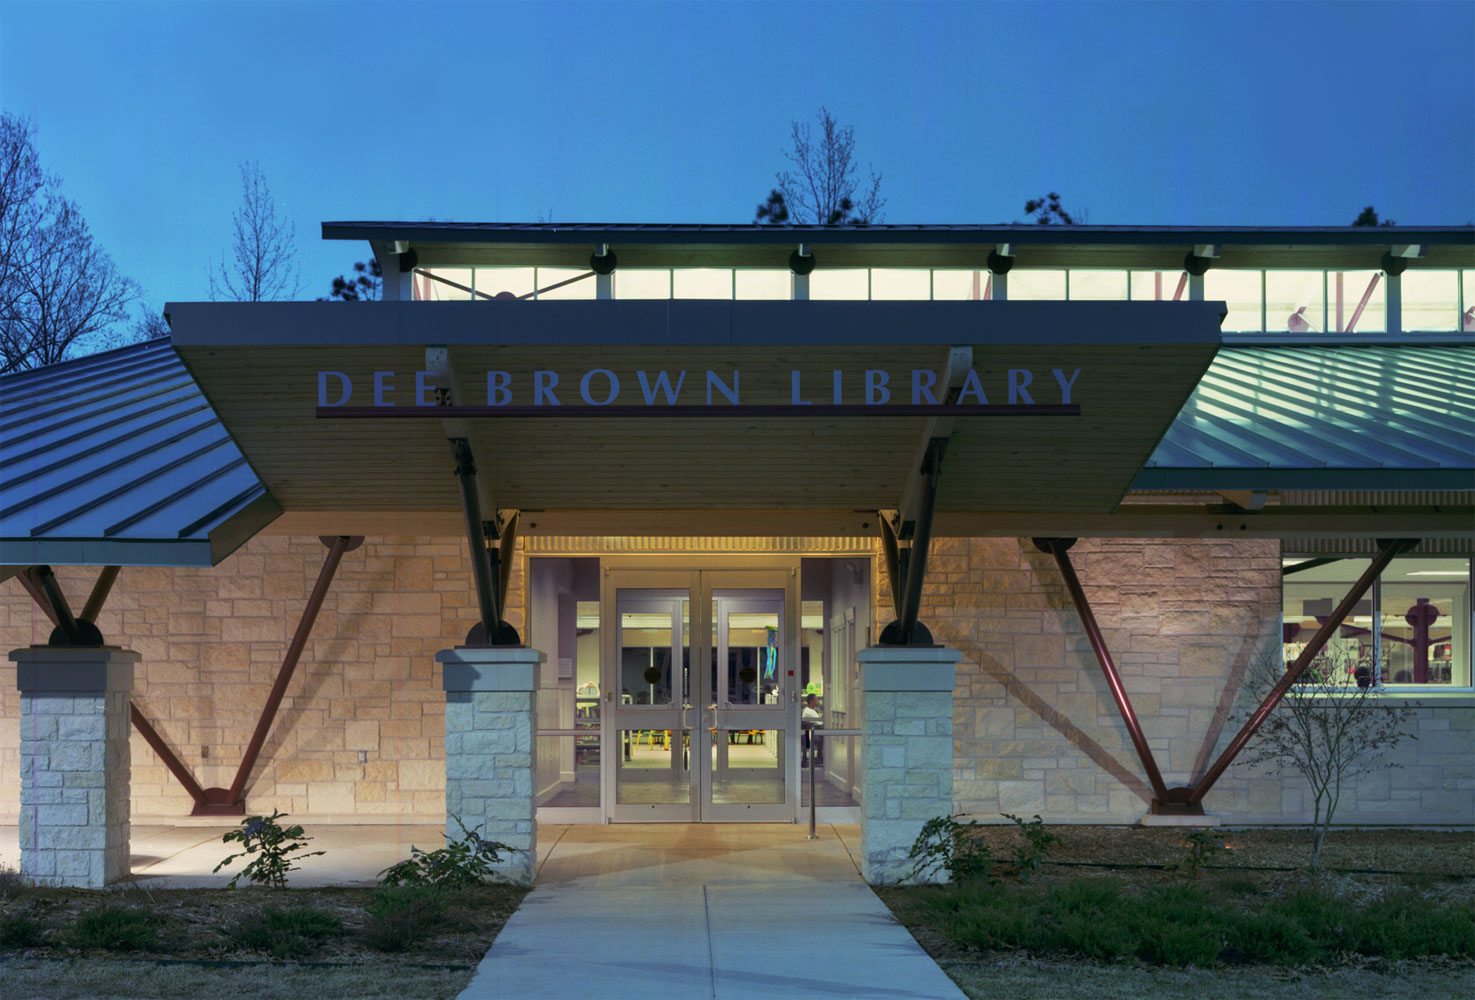 Dee Brown Public Library